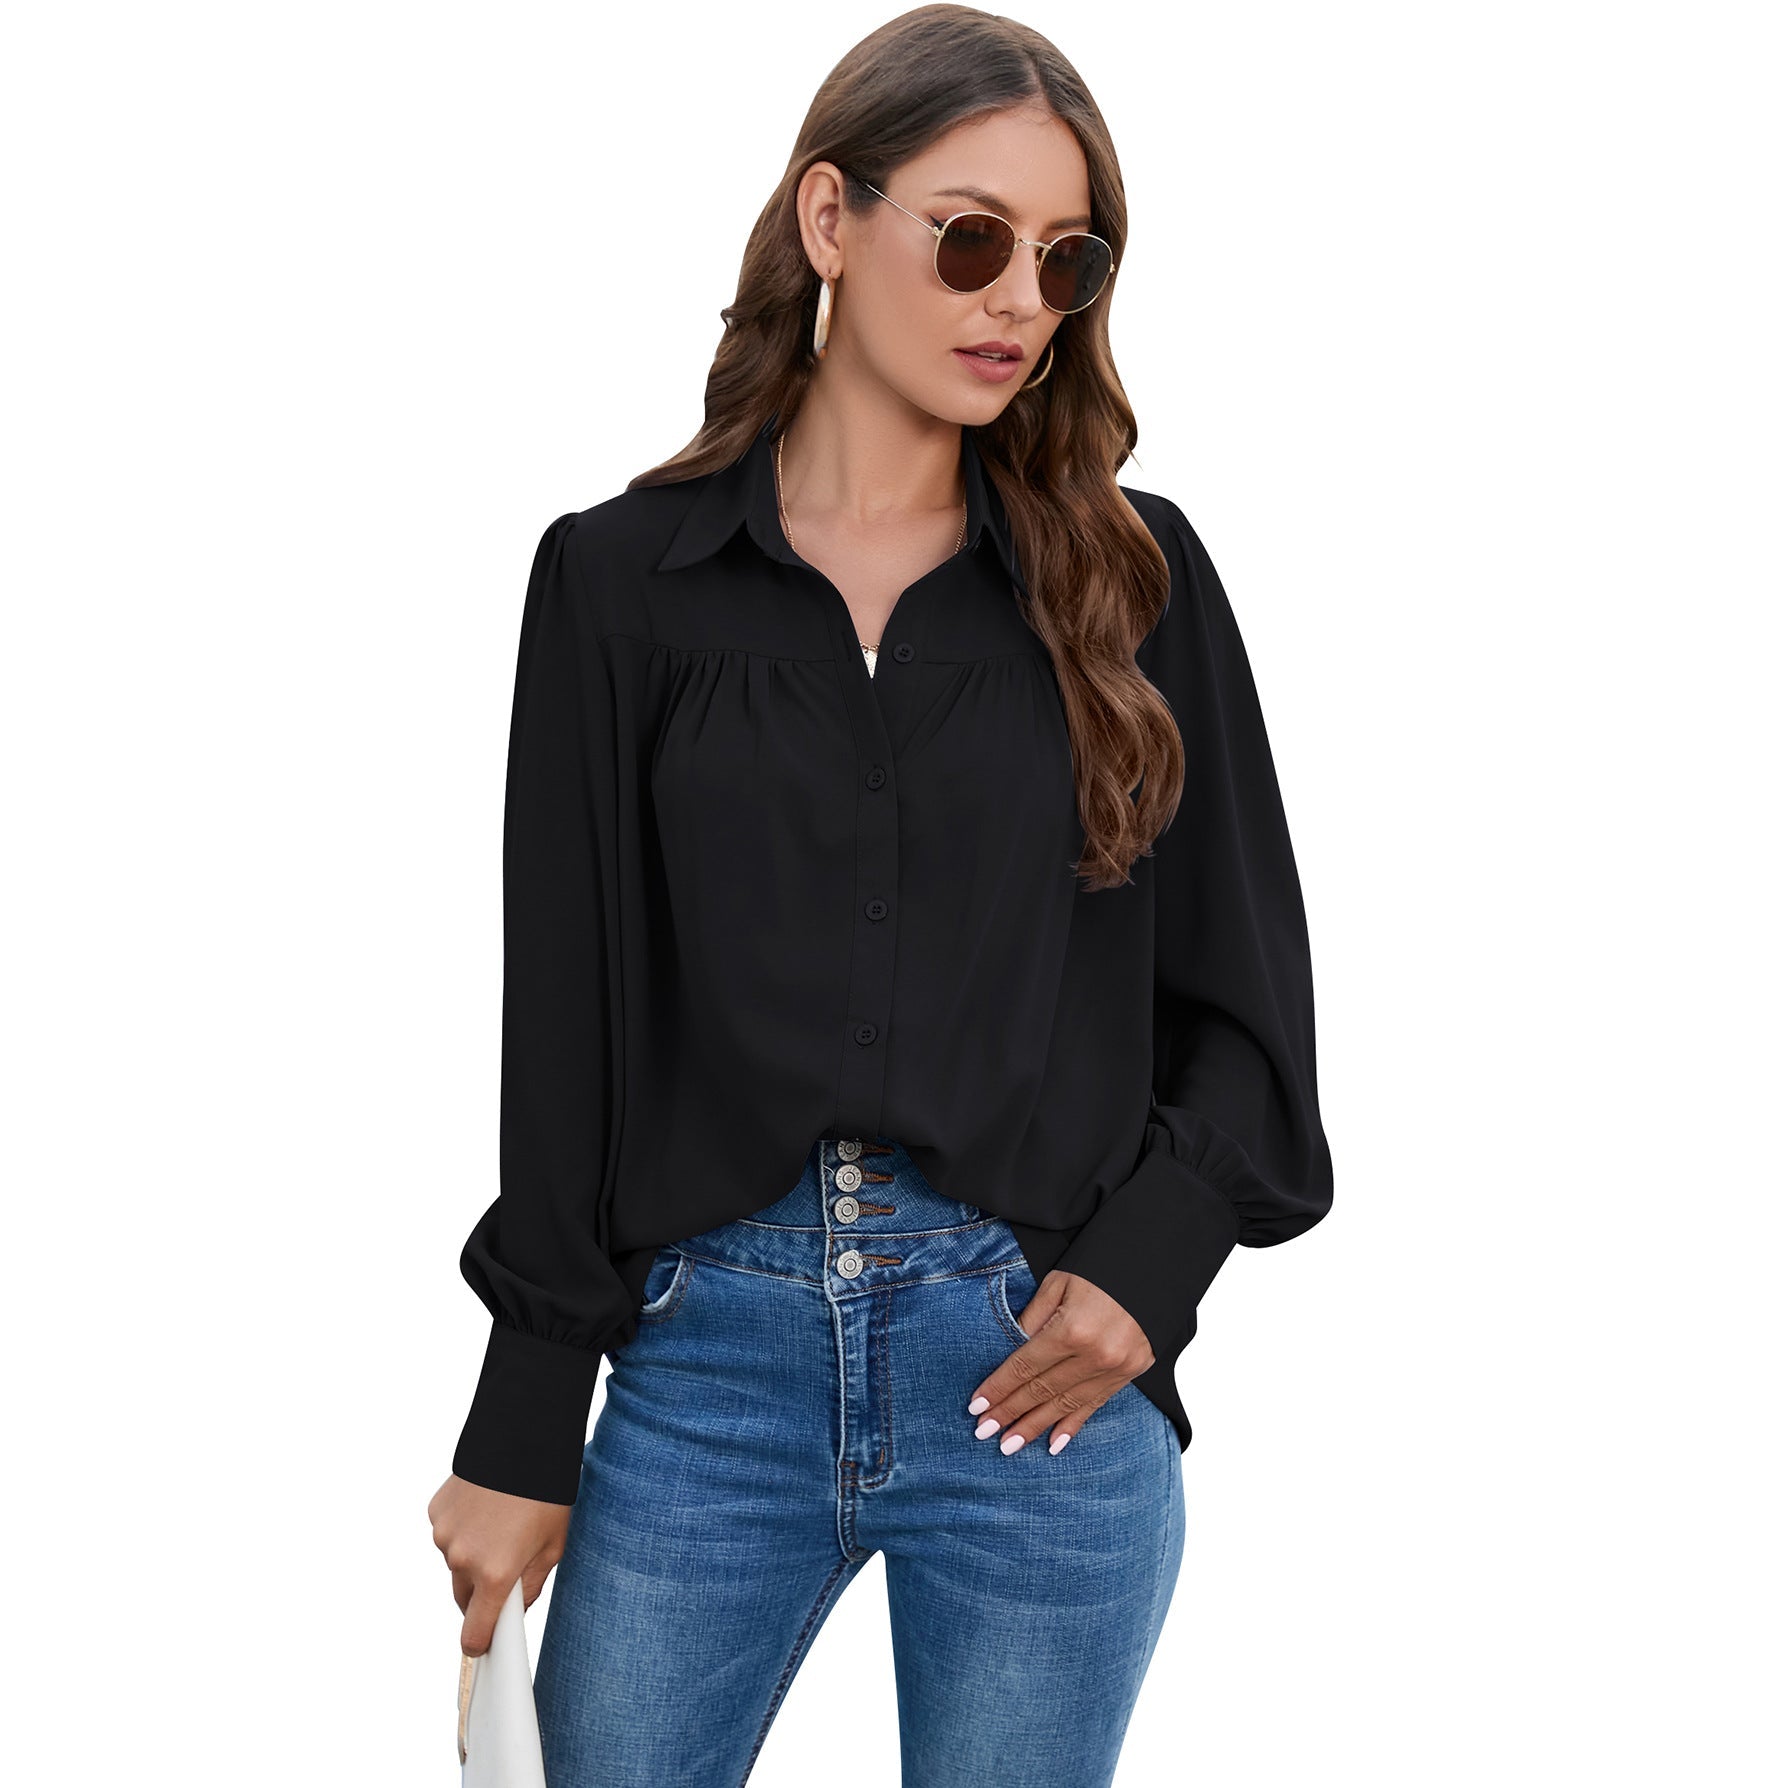 Casual Chiffon Long Sleeves Blouses for Women-Shirts & Tops-Black-S-Free Shipping at meselling99